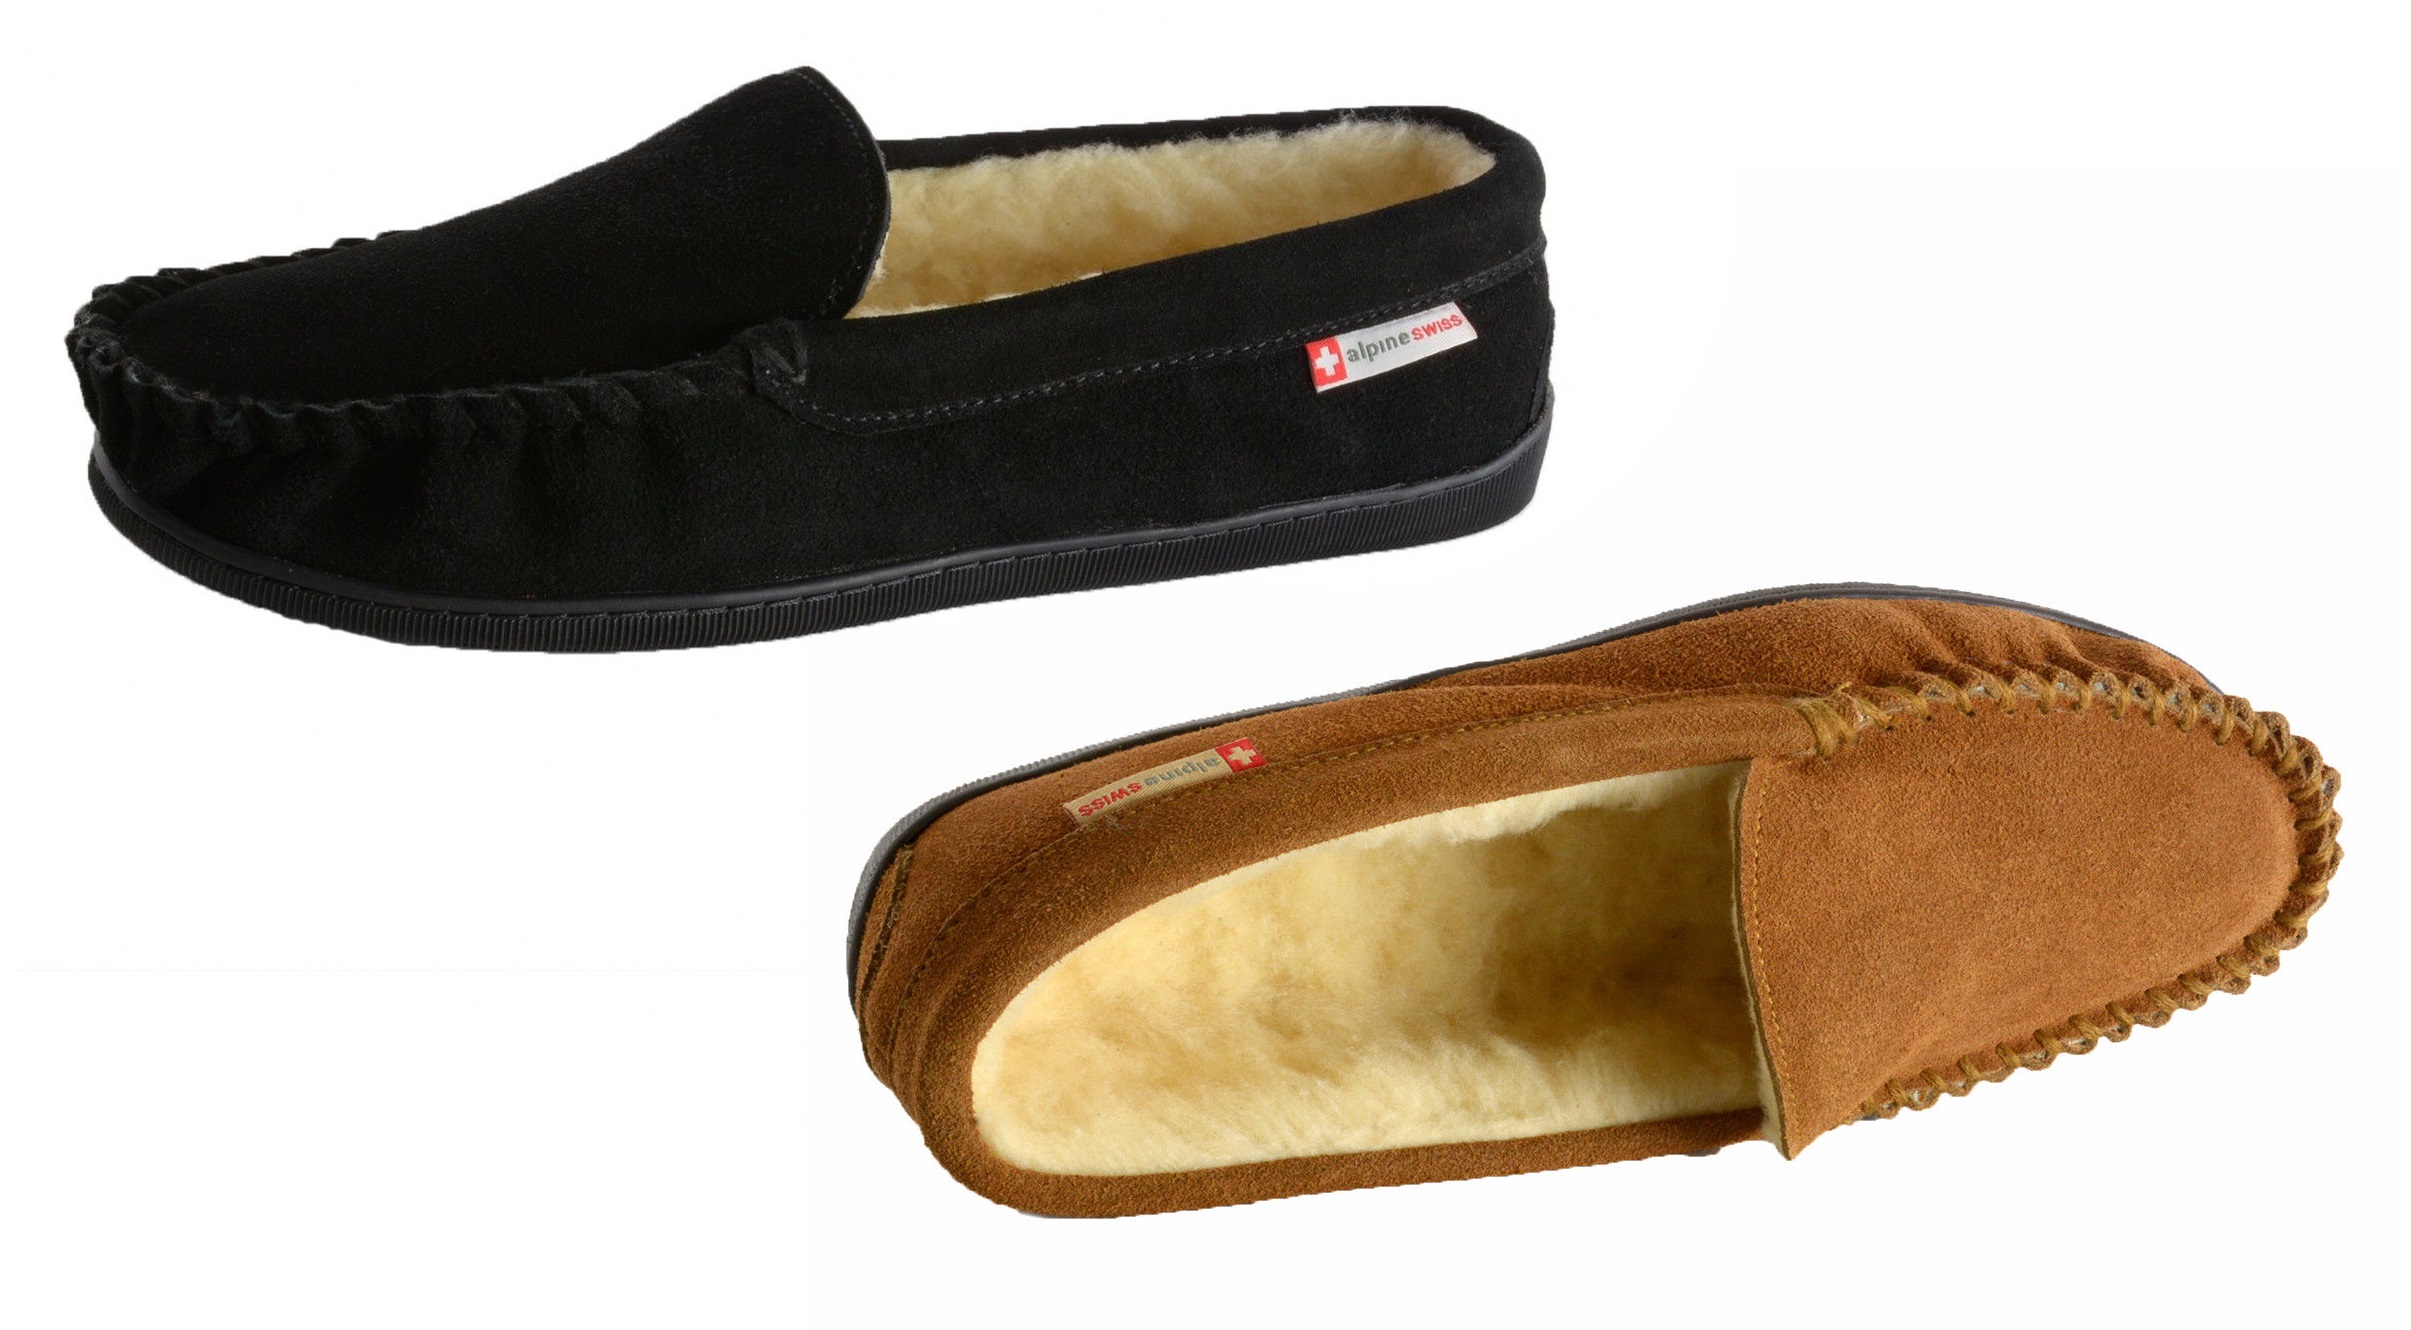 Alpine Swiss Yukon Mens Suede Shearling Moccasin Slippers Only $14.99!